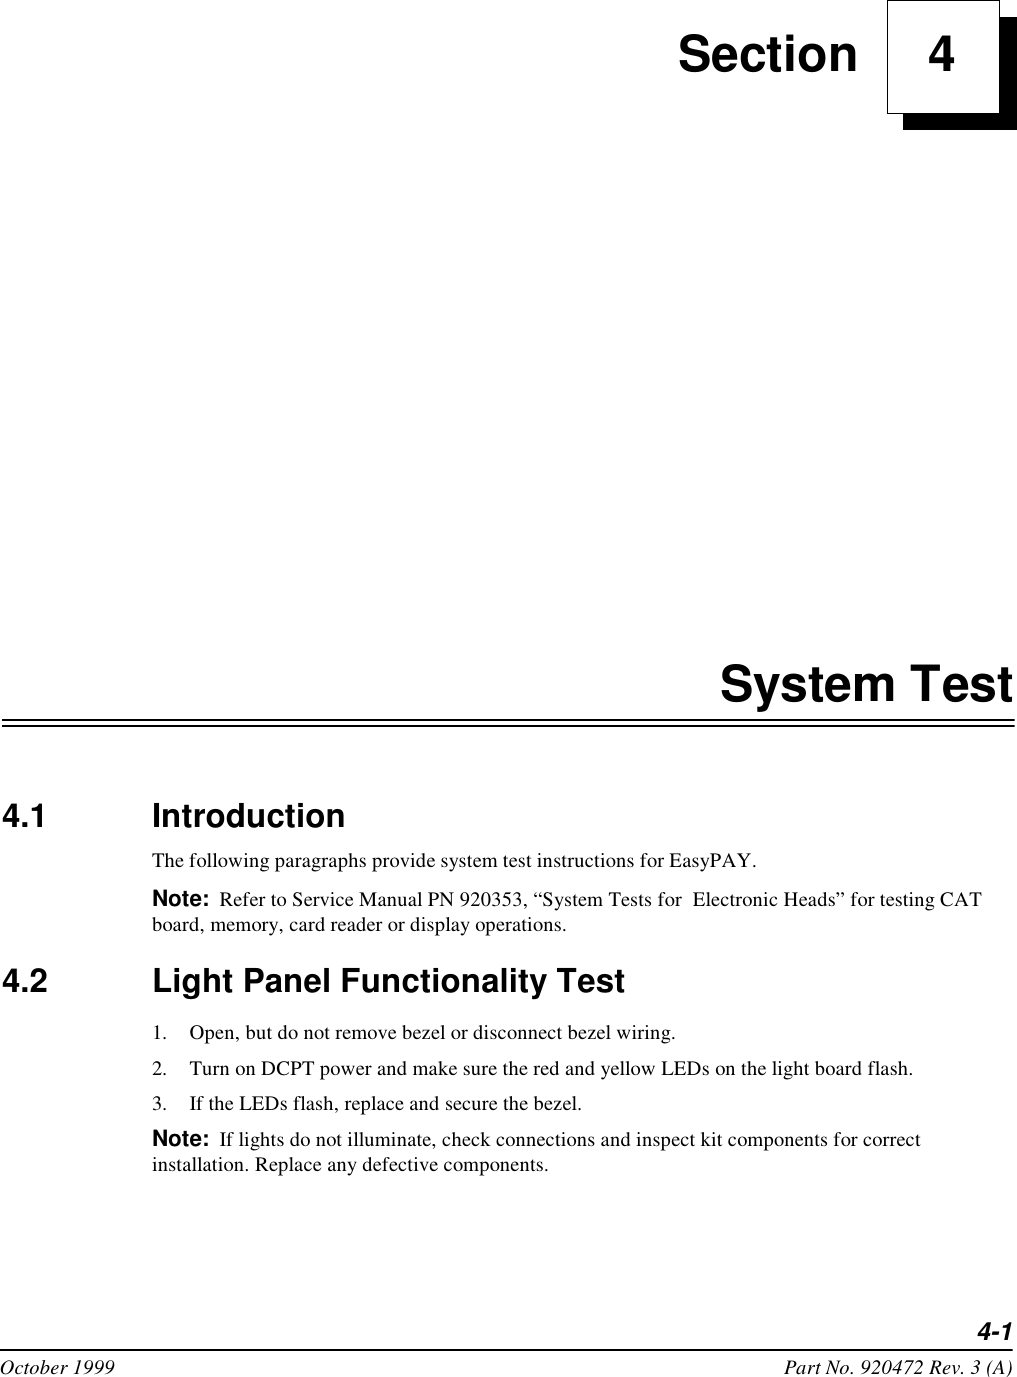 4-1October 1999 Part No. 920472 Rev. 3 (A) Section     4System Test4.1 IntroductionThe following paragraphs provide system test instructions for EasyPAY. Note: Refer to Service Manual PN 920353, “System Tests for  Electronic Heads” for testing CAT board, memory, card reader or display operations.4.2 Light Panel Functionality Test1. Open, but do not remove bezel or disconnect bezel wiring.2. Turn on DCPT power and make sure the red and yellow LEDs on the light board flash.3. If the LEDs flash, replace and secure the bezel.Note: If lights do not illuminate, check connections and inspect kit components for correct installation. Replace any defective components.